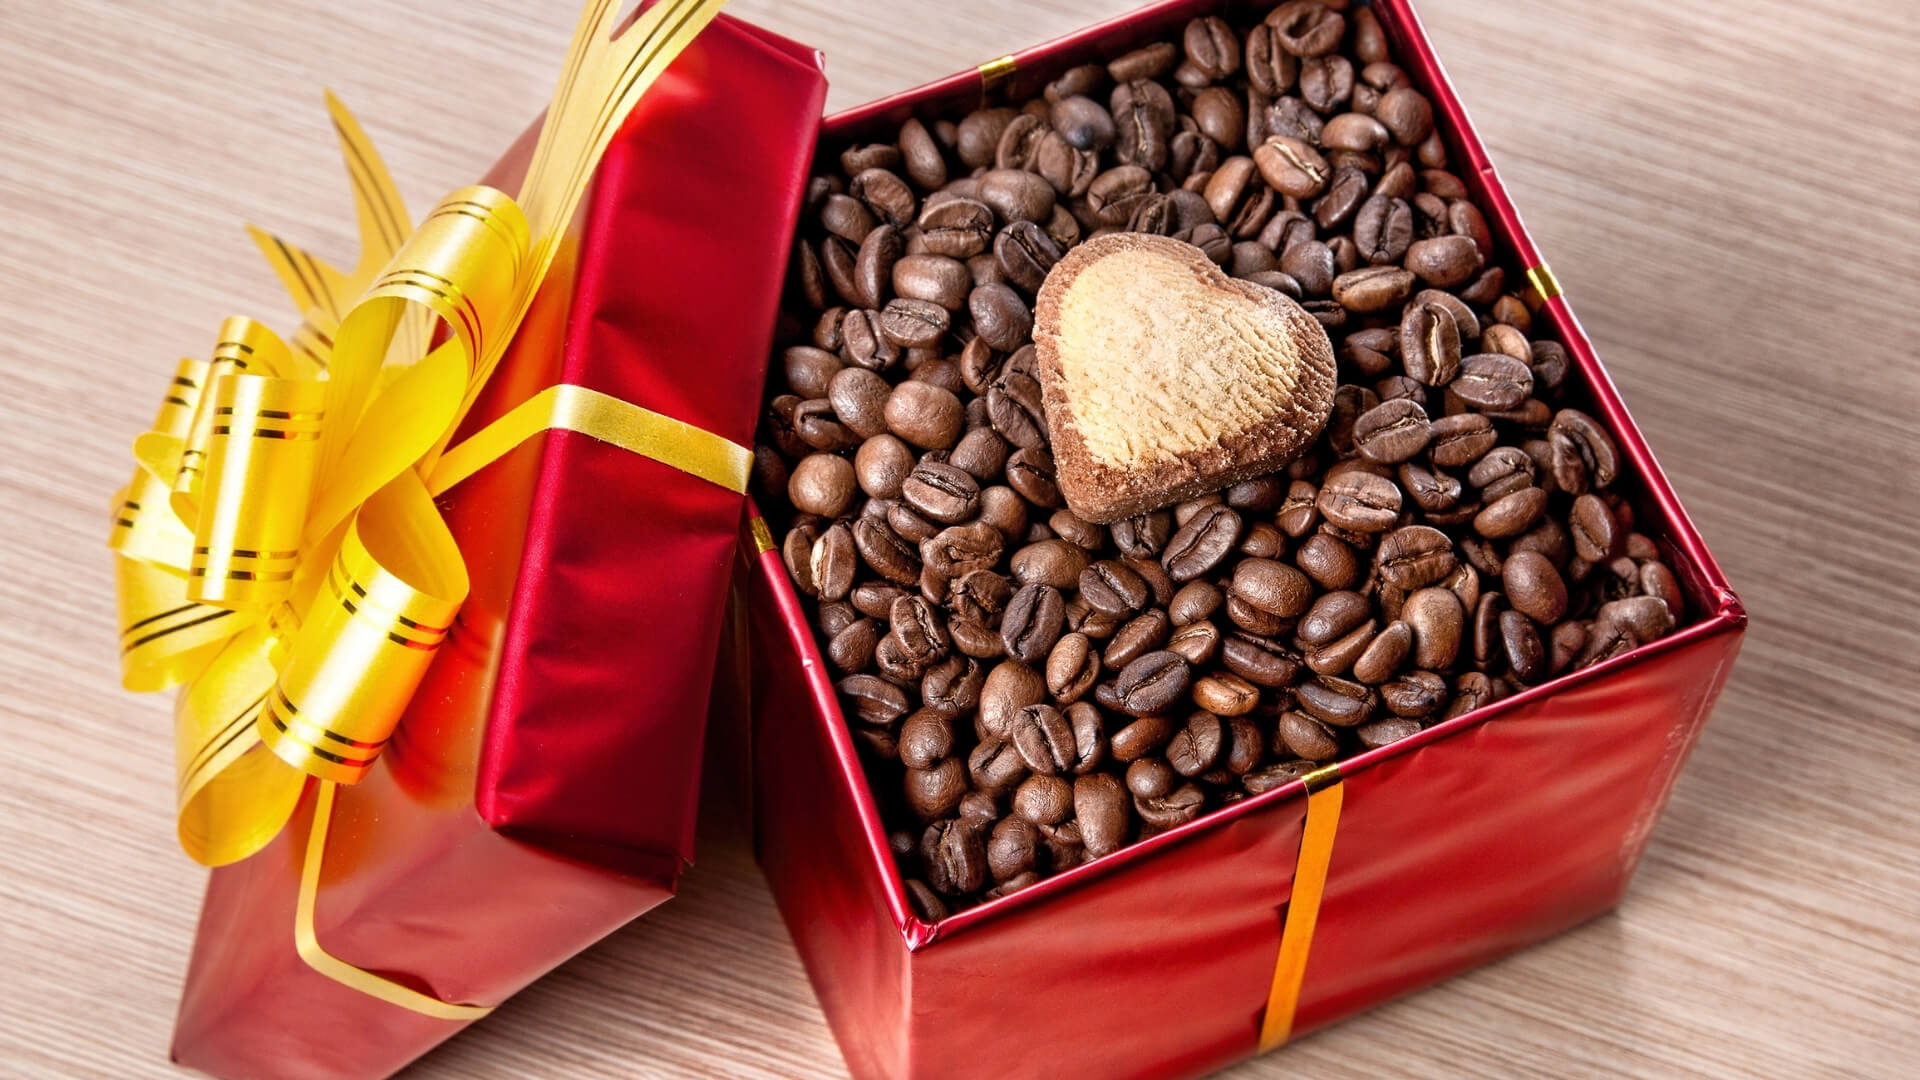 a gift for. coffee lover wrapped in red box